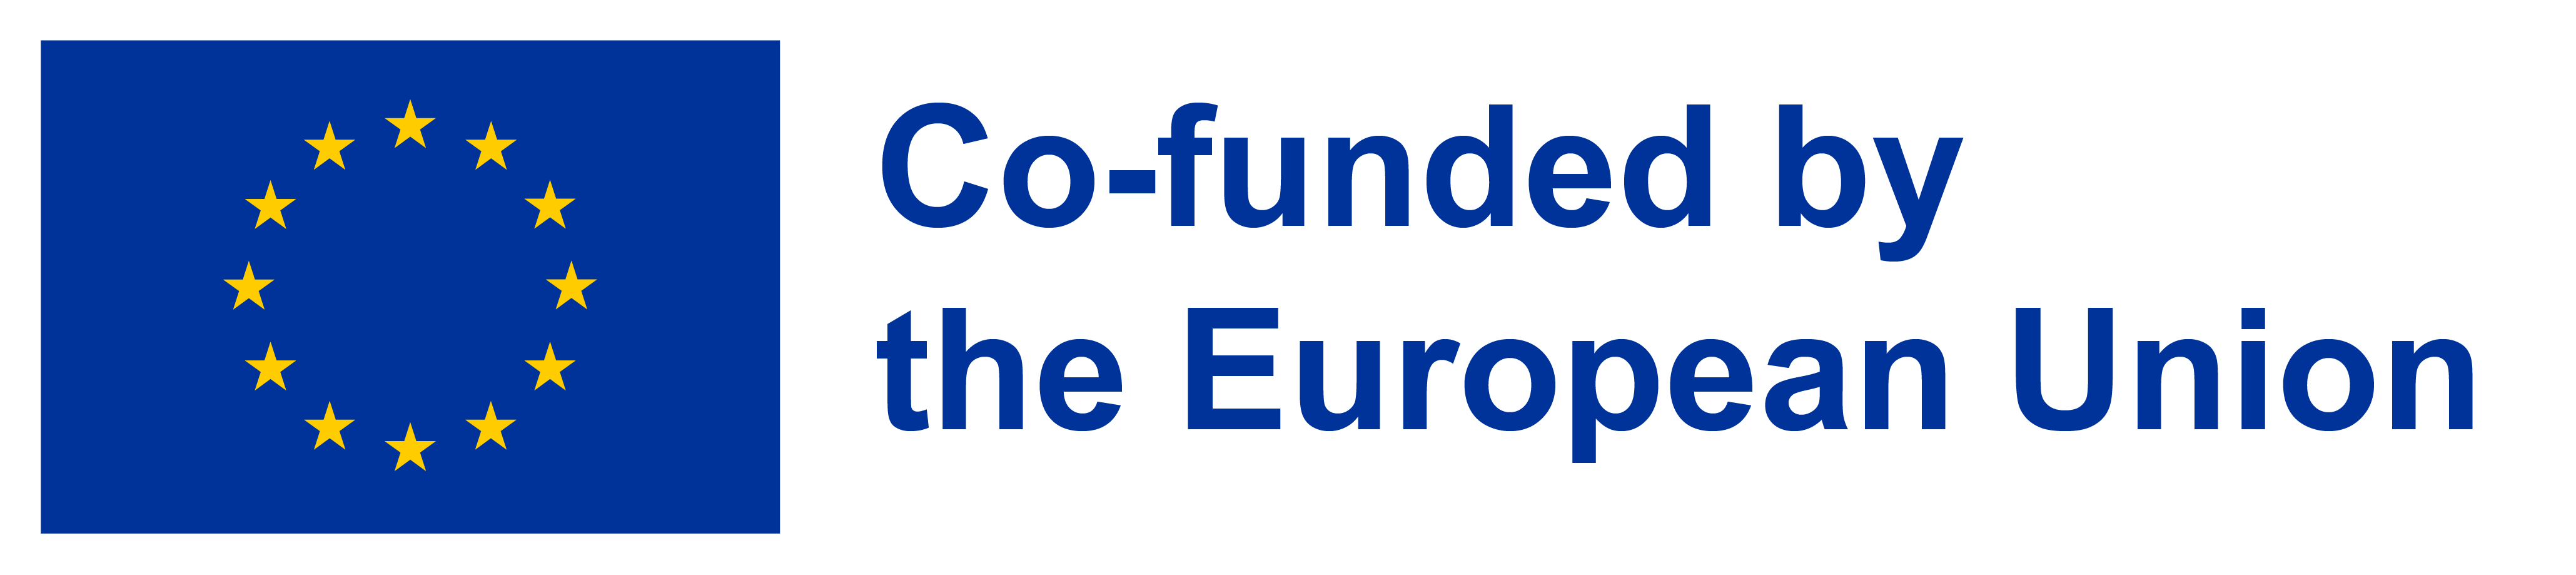 freispace is co-funded by the European Union